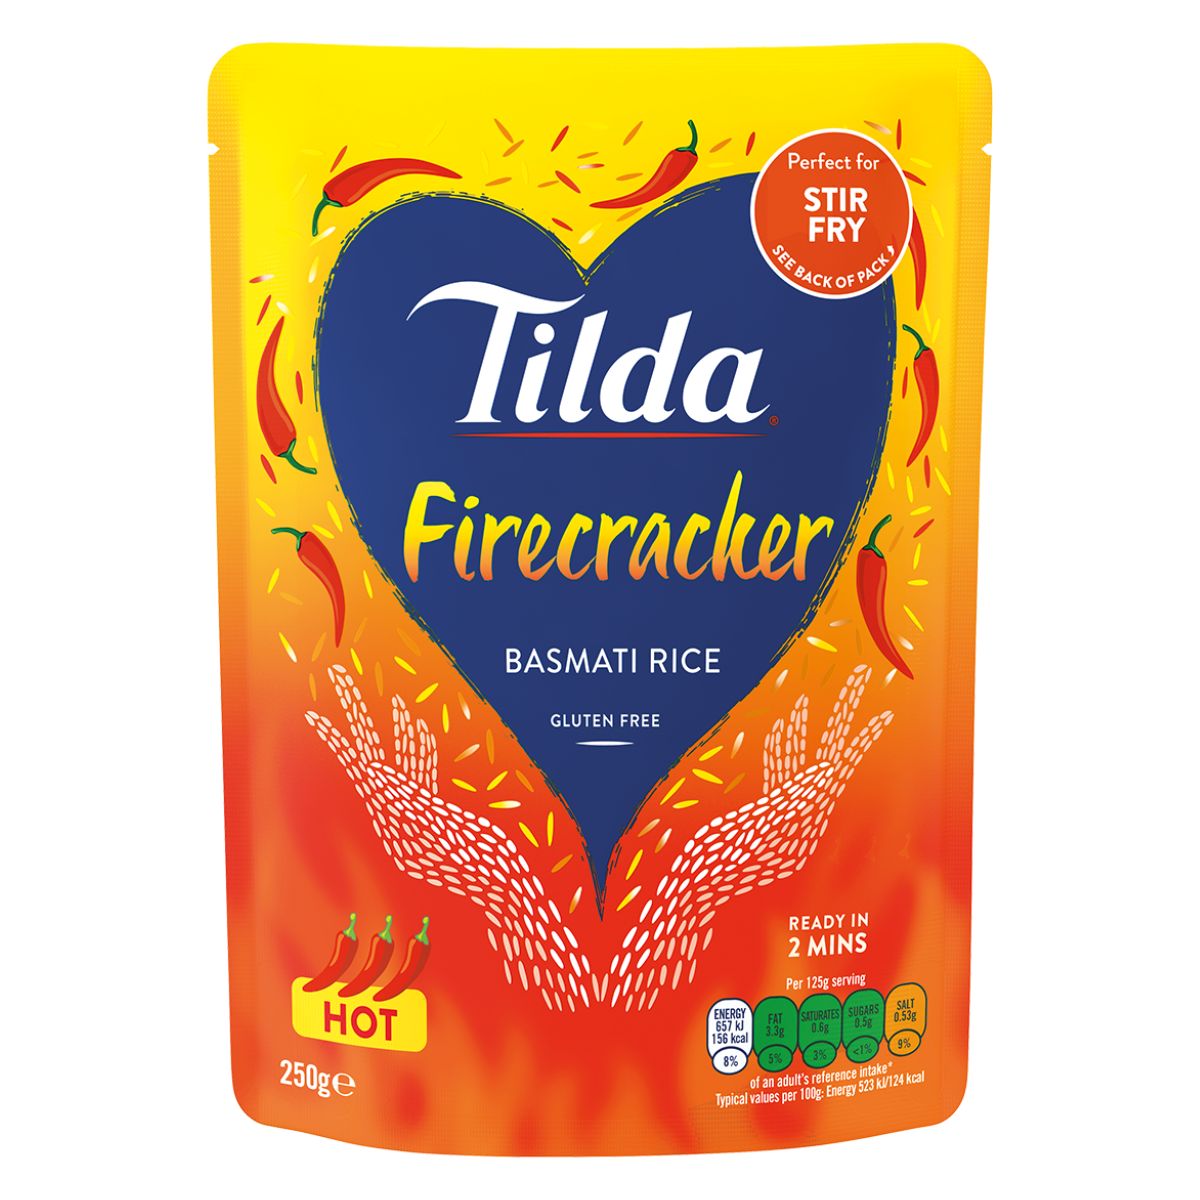 Package of Tilda - Firecracker Steamed Basmati Rice, spicy and gluten-free, weighing 250g.